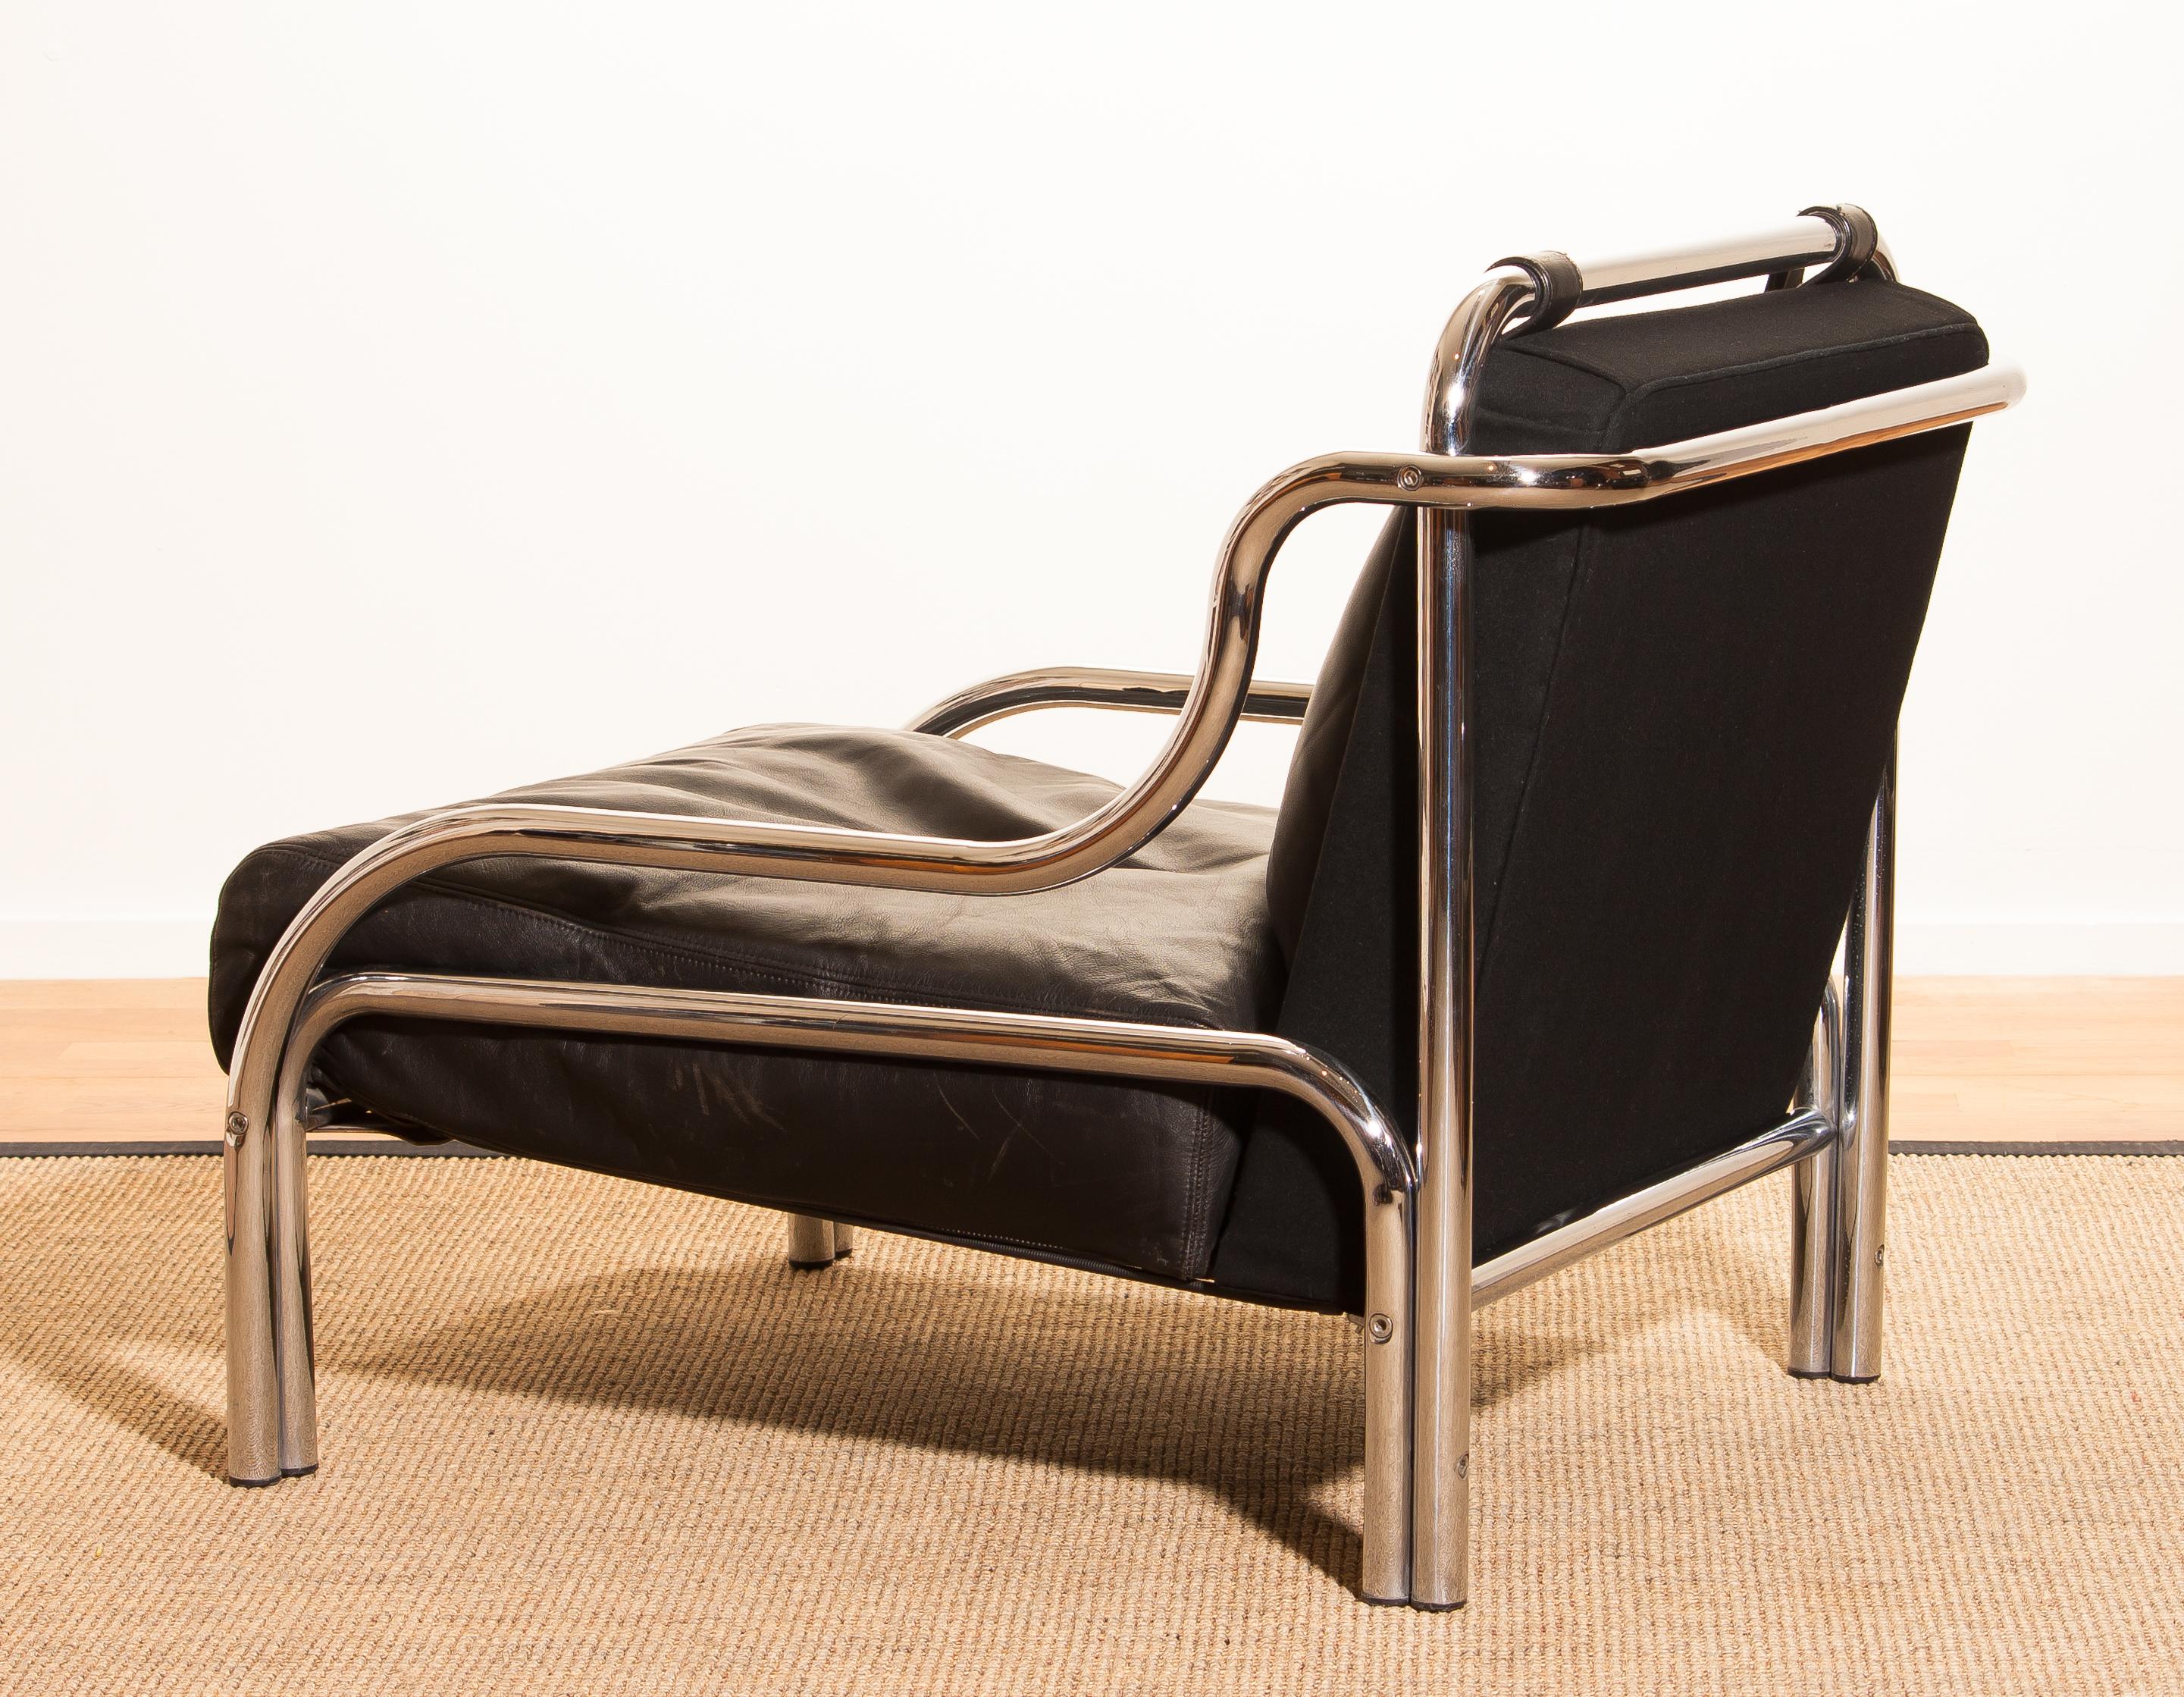 Mid-20th Century Leather and Chrome Lounge Chair by Gae Aulenti for Poltronova, 1960s